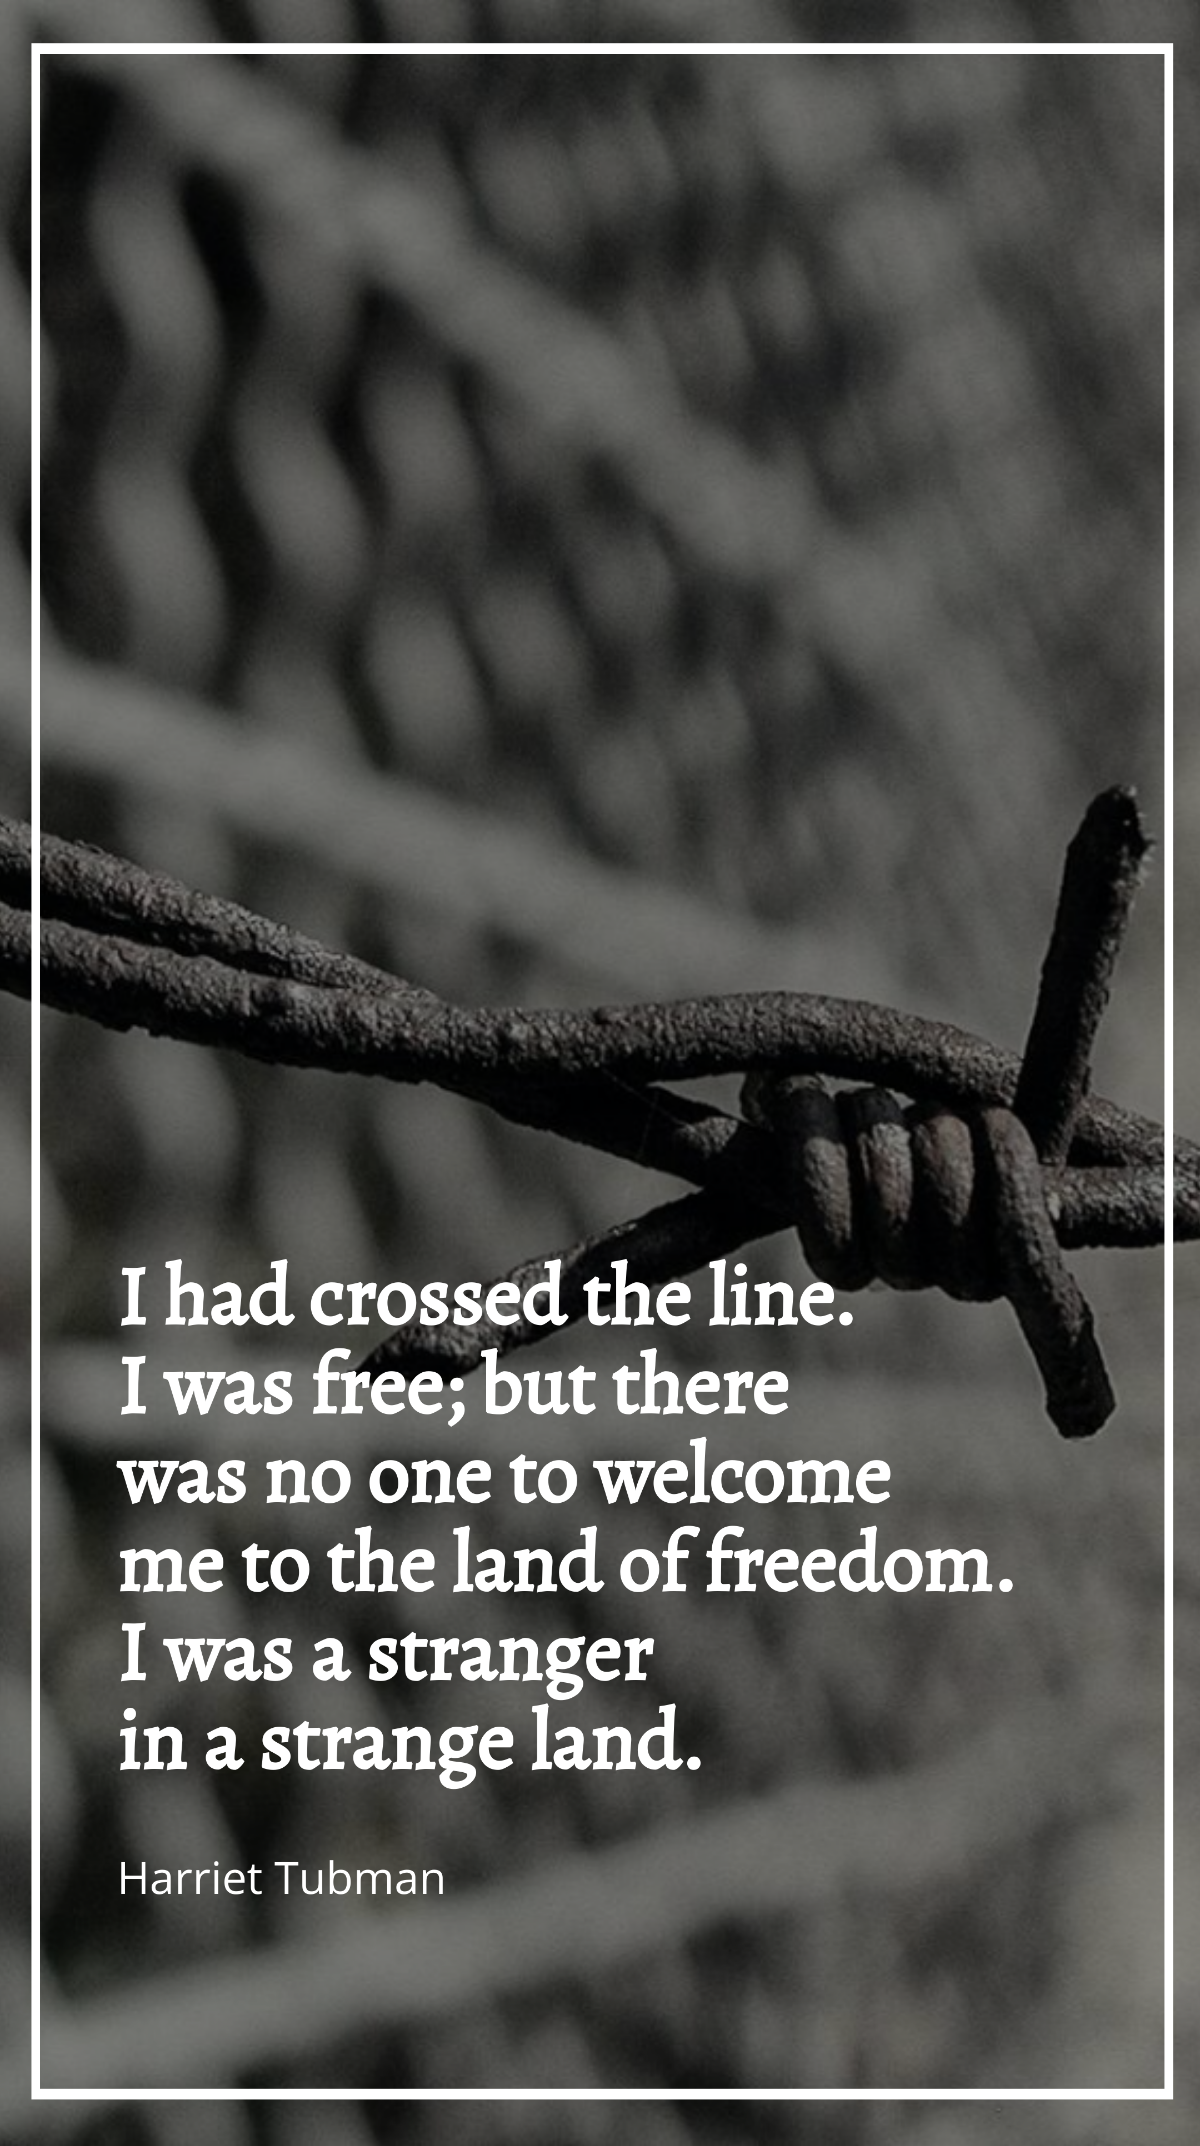 Harriet Tubman - I had crossed the line. I was free; but there was no one to welcome me to the land of freedom. I was a stranger in a strange land. Template